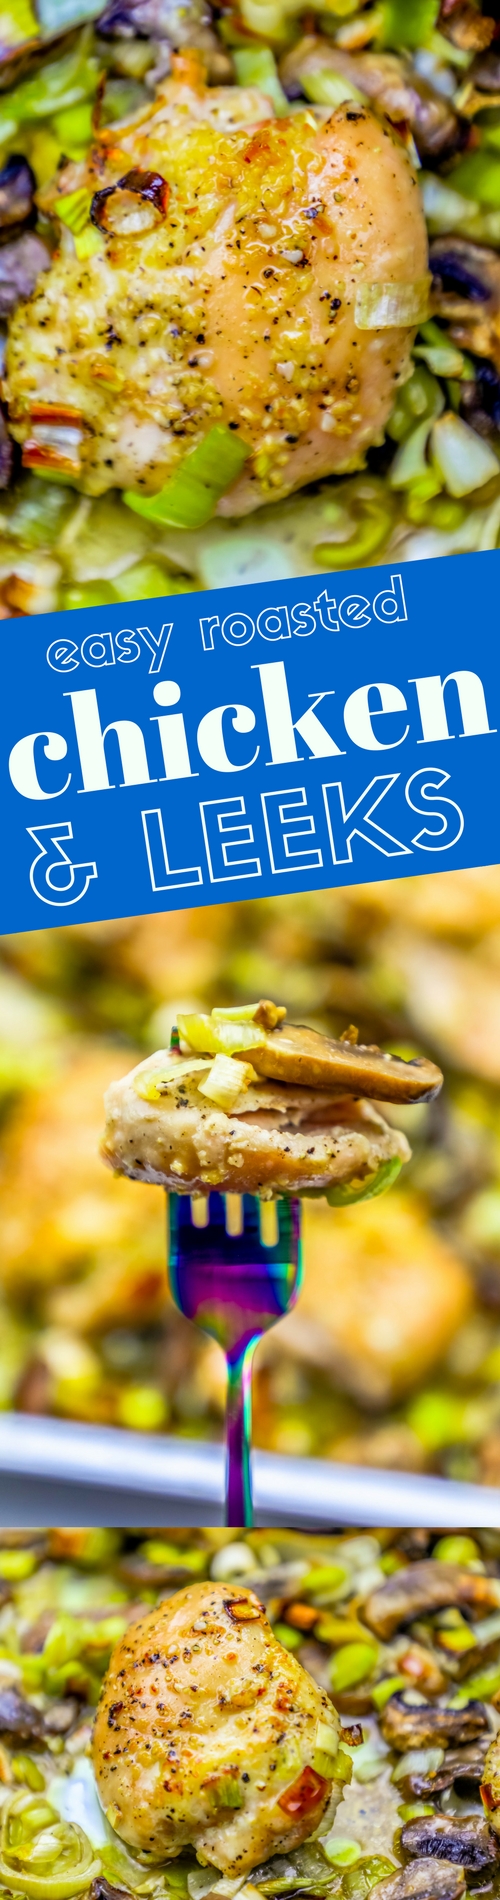 A picture of chicken and leeks